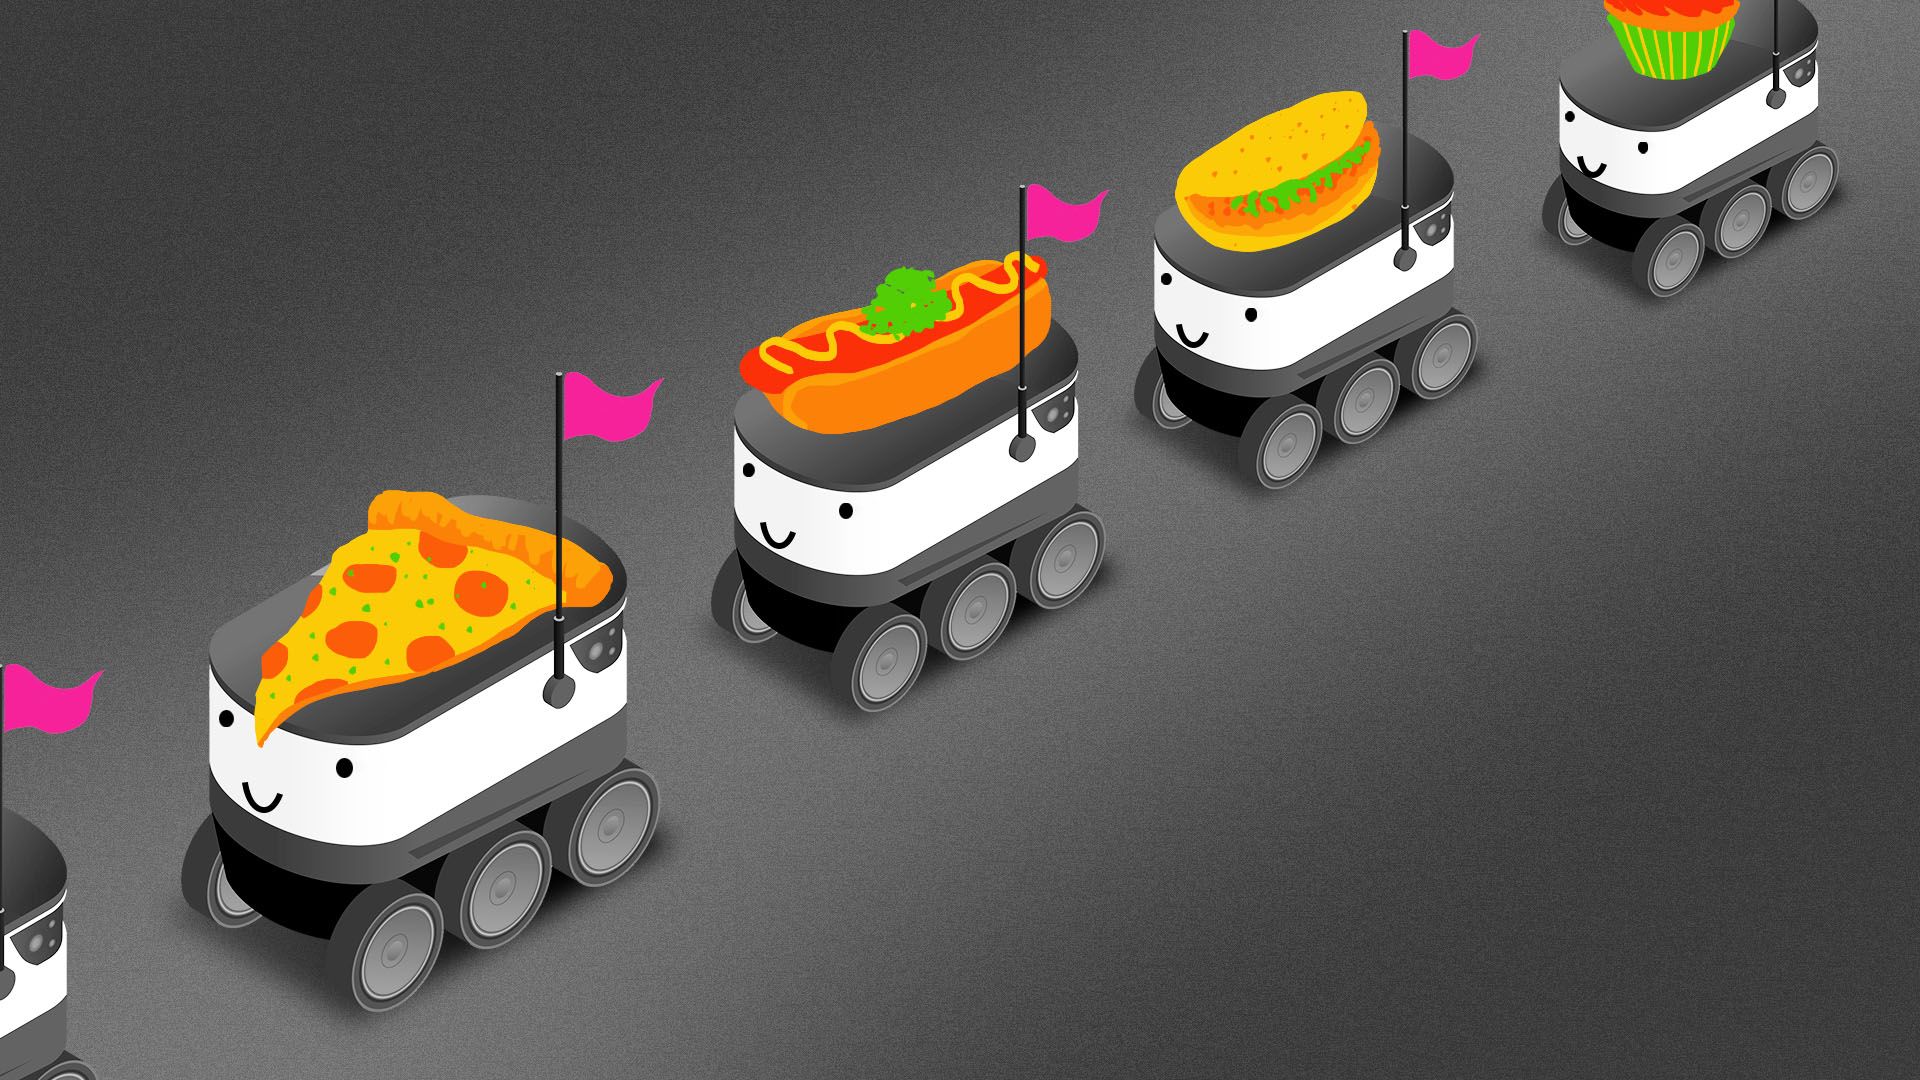 Illustration of a line of delivery robots with food items on their backs